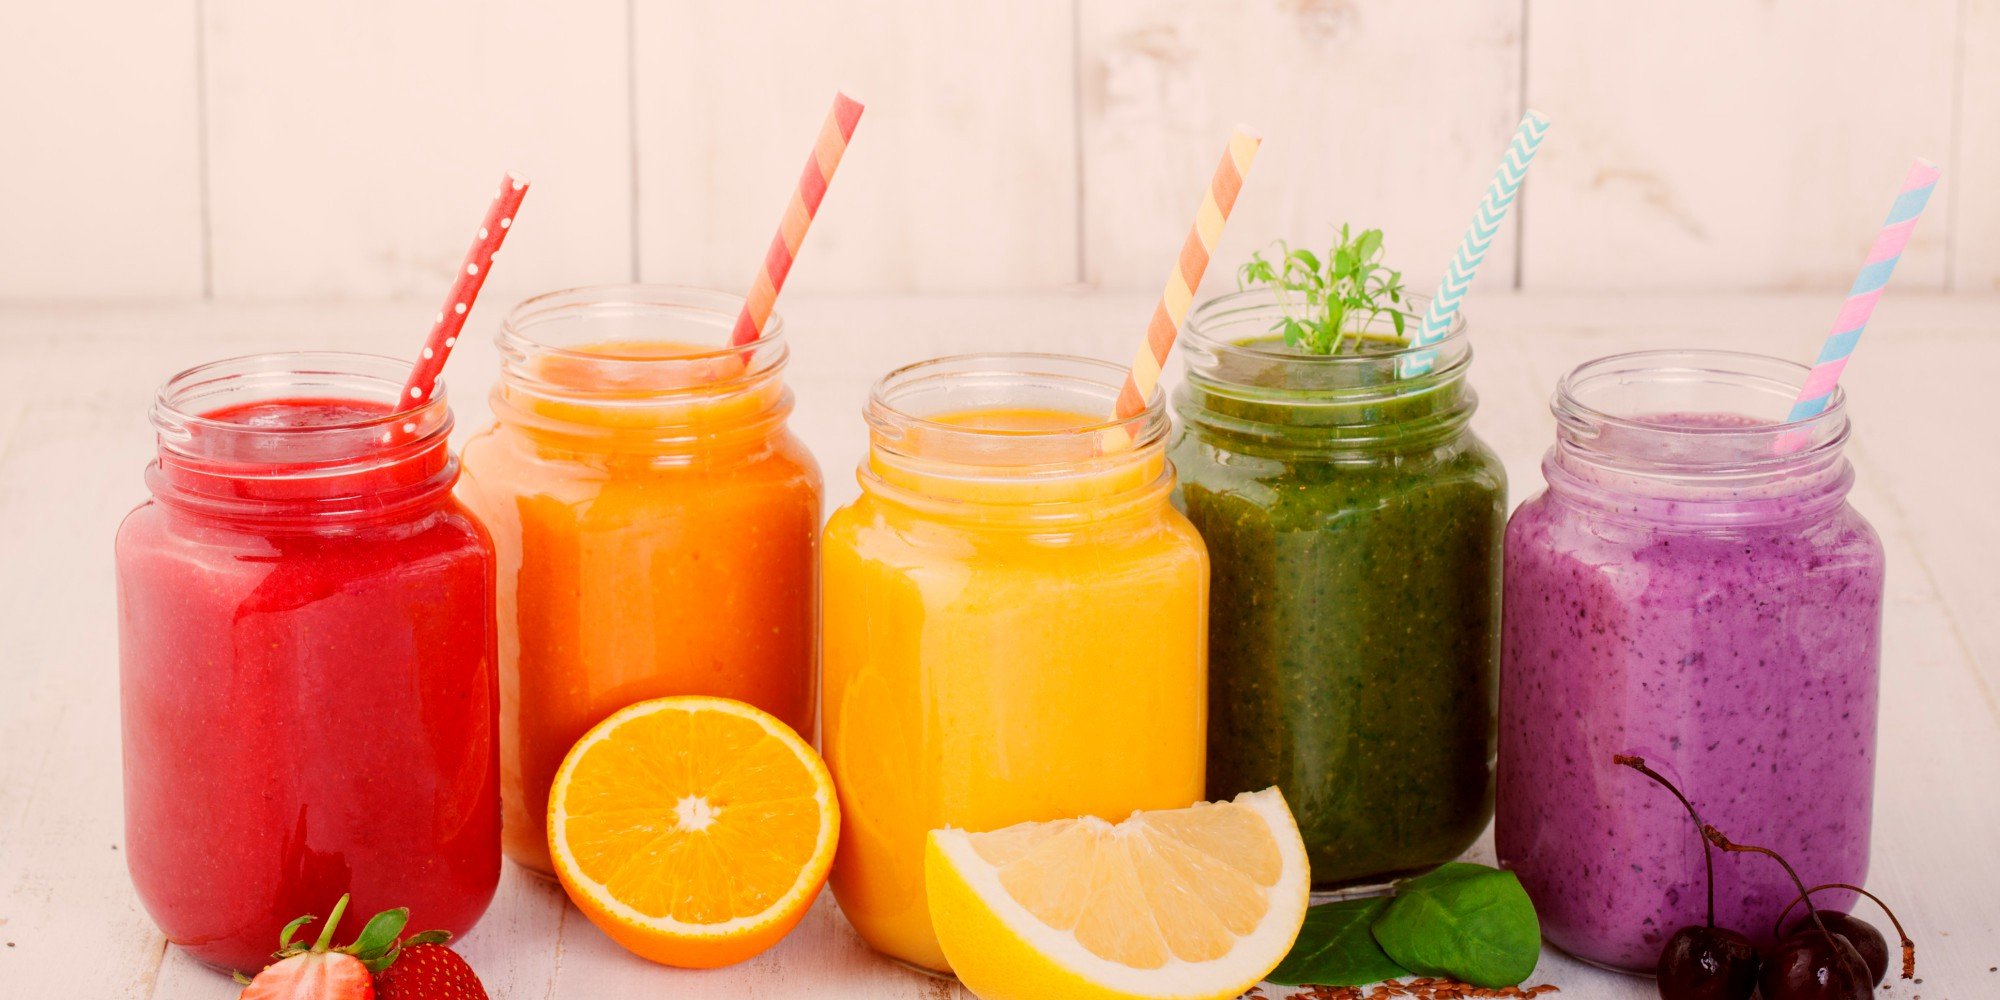 Healthy Smoothie Recipes for Weight Loss